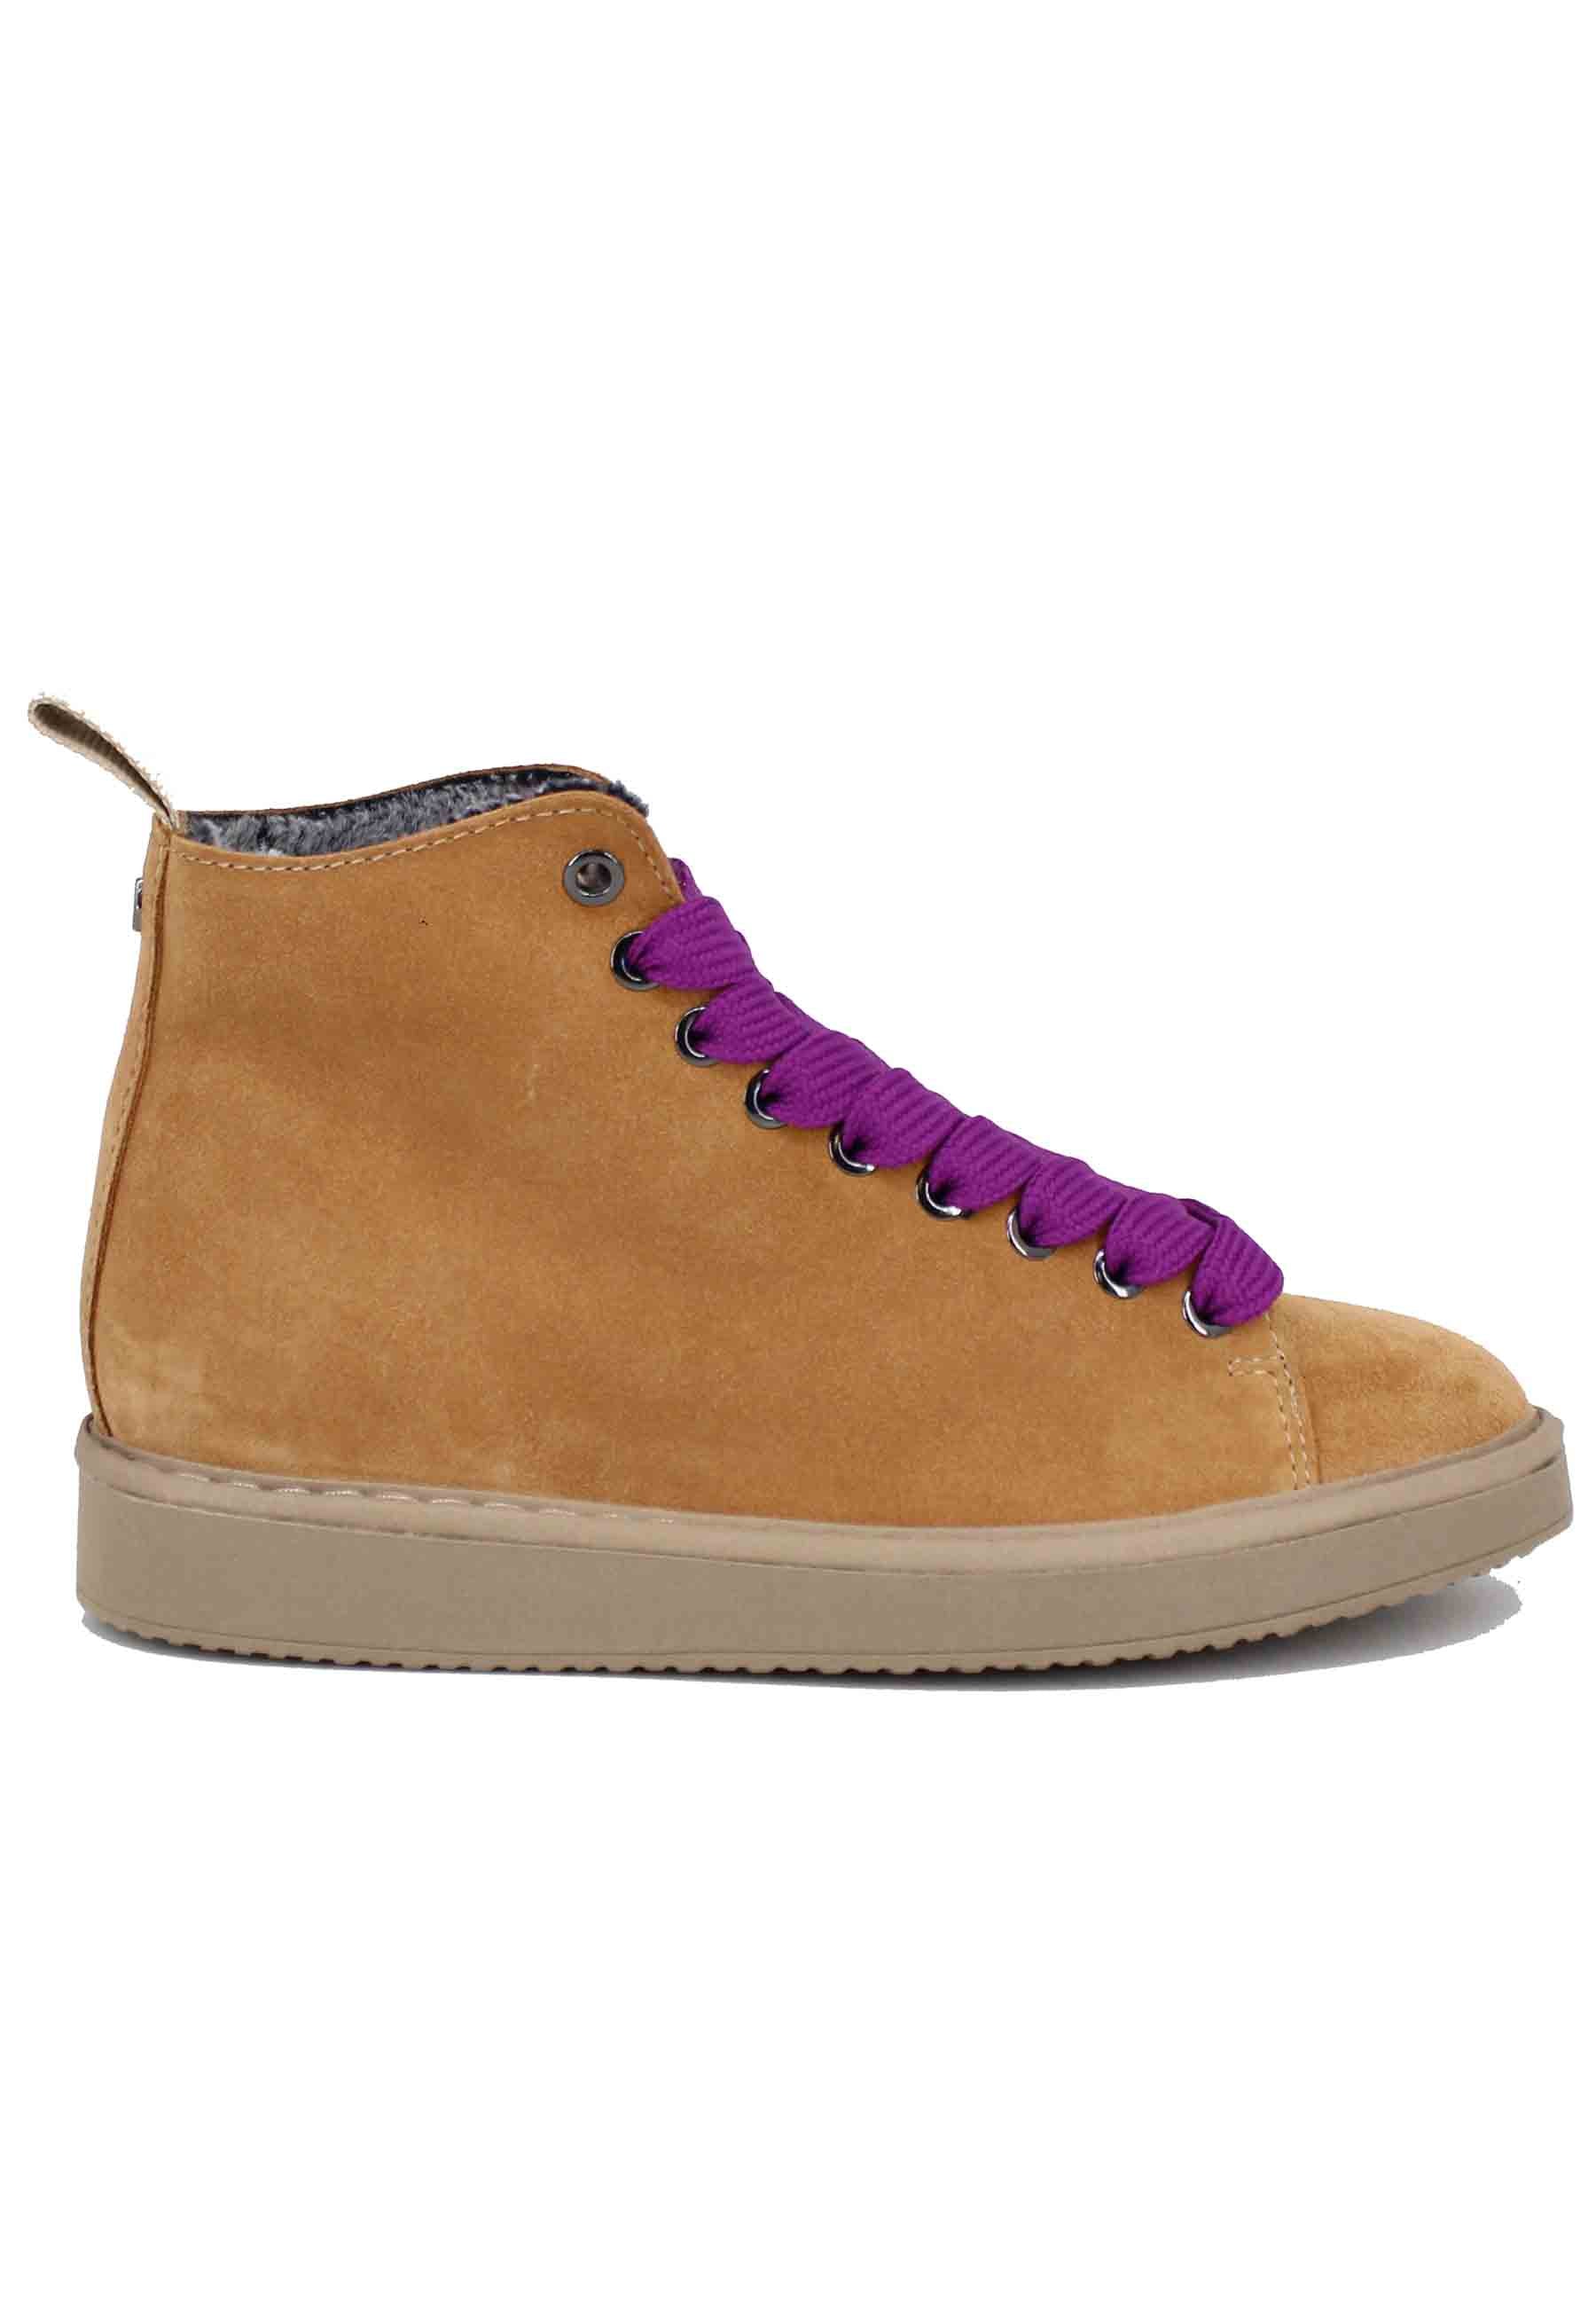 Women's sneakers in leather suede